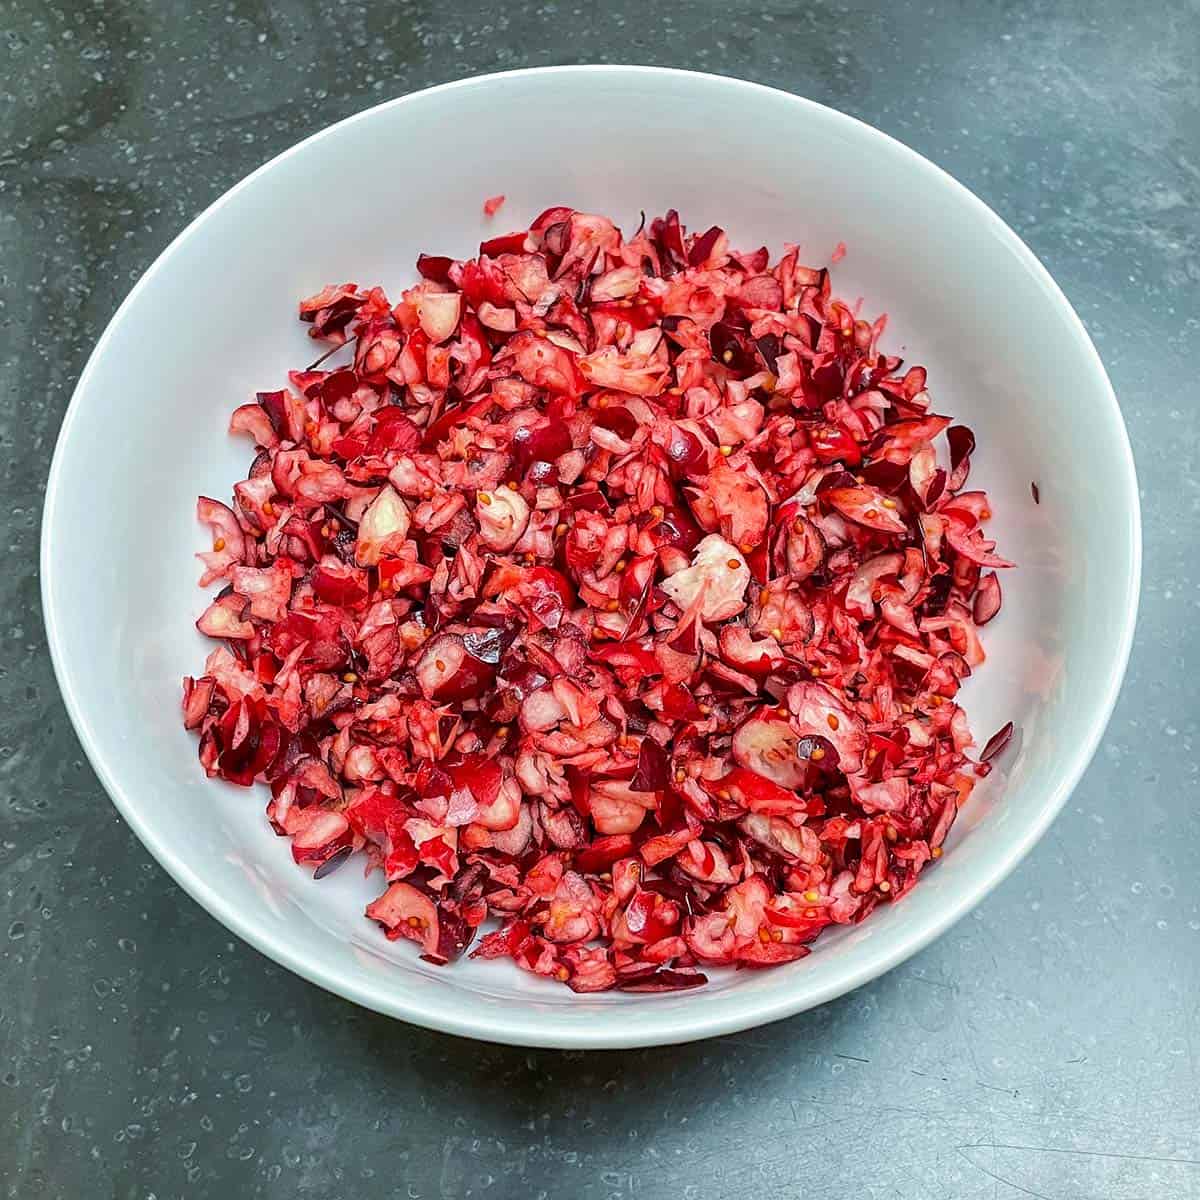 Chopped fresh cranberries in a bowl.